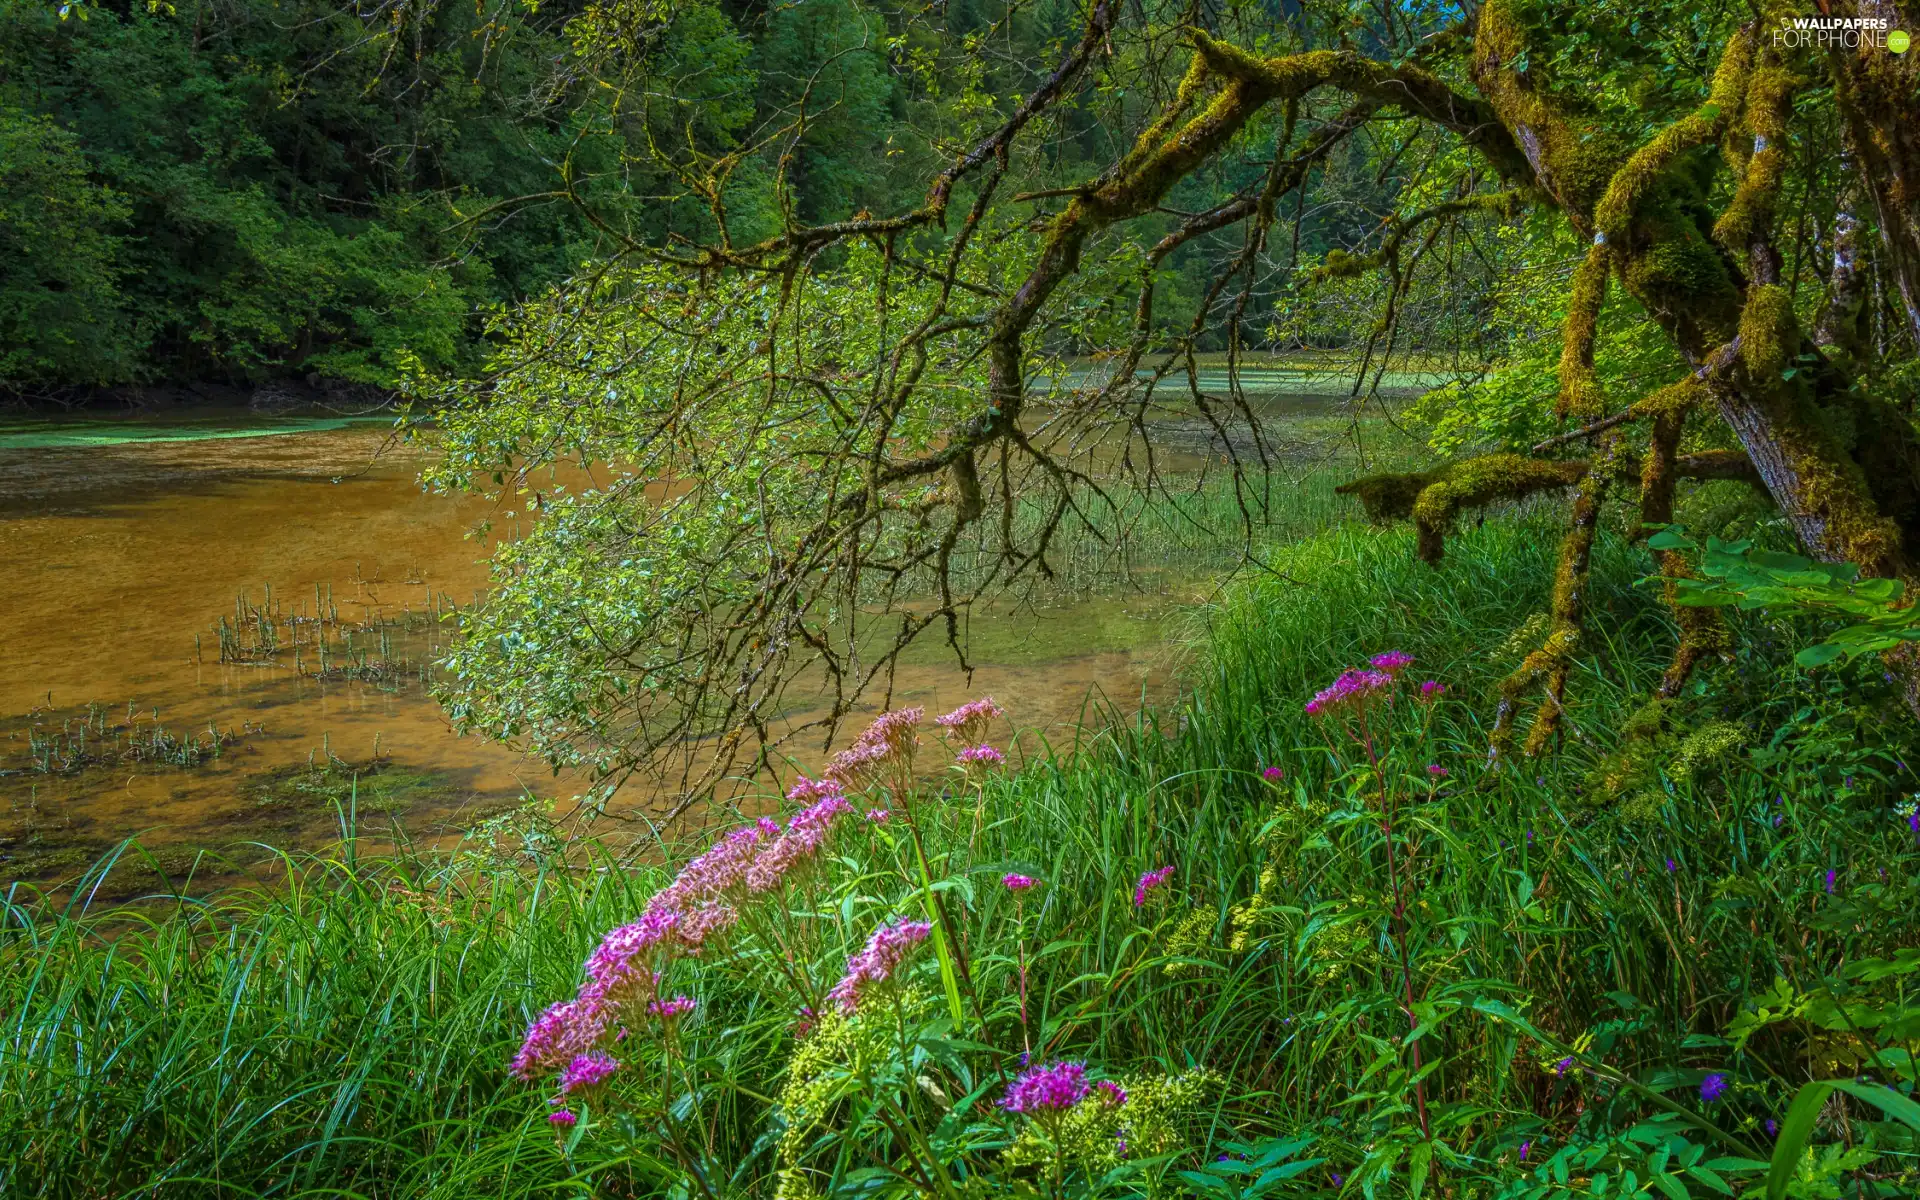 Flowers, grass, branch pics, Pink, forest, trees, Pond - car